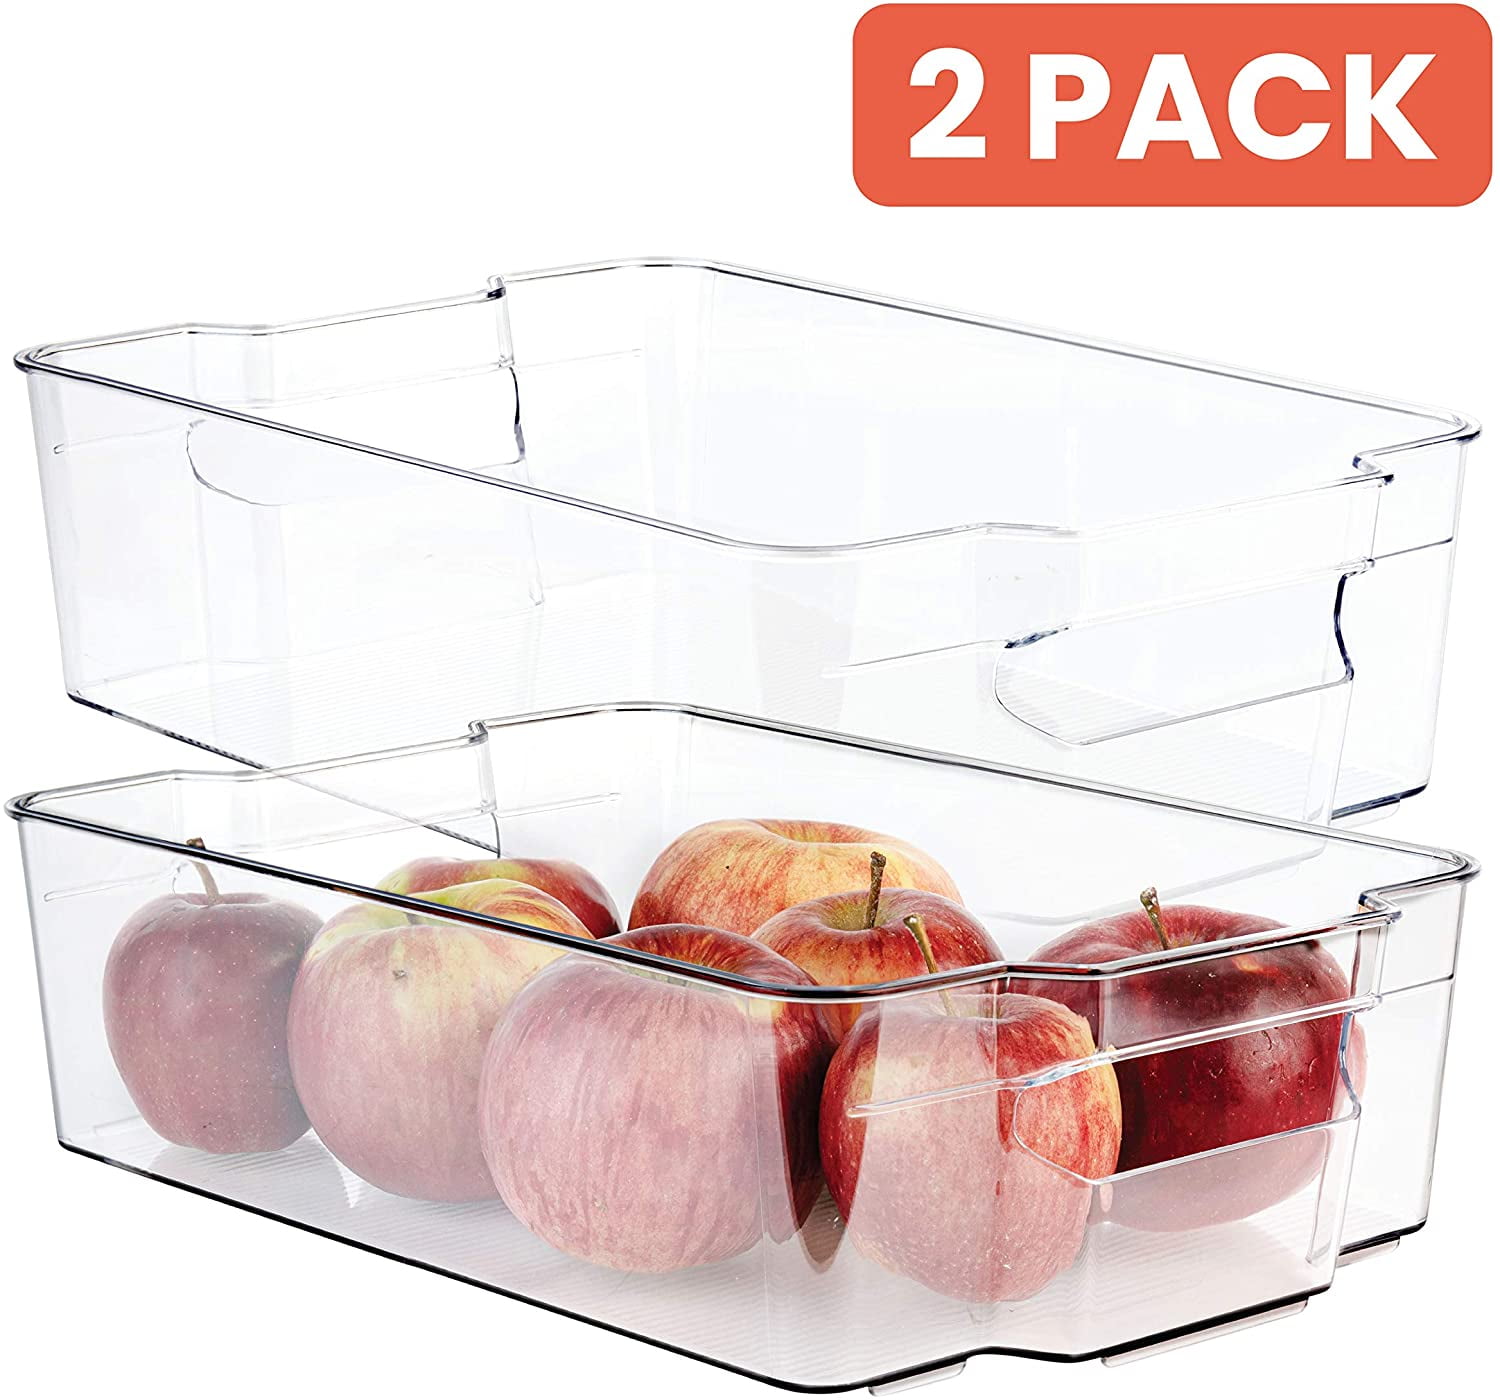 Homeries Stackable Acrylic Storage & Organization Bins Basket - for  Kitchen, Pantry, Cabinets, Refrigerator, Pantry, Offices, Closets,  Bedrooms, Bathrooms - Space Saving & Open Front (Pack of 2) 